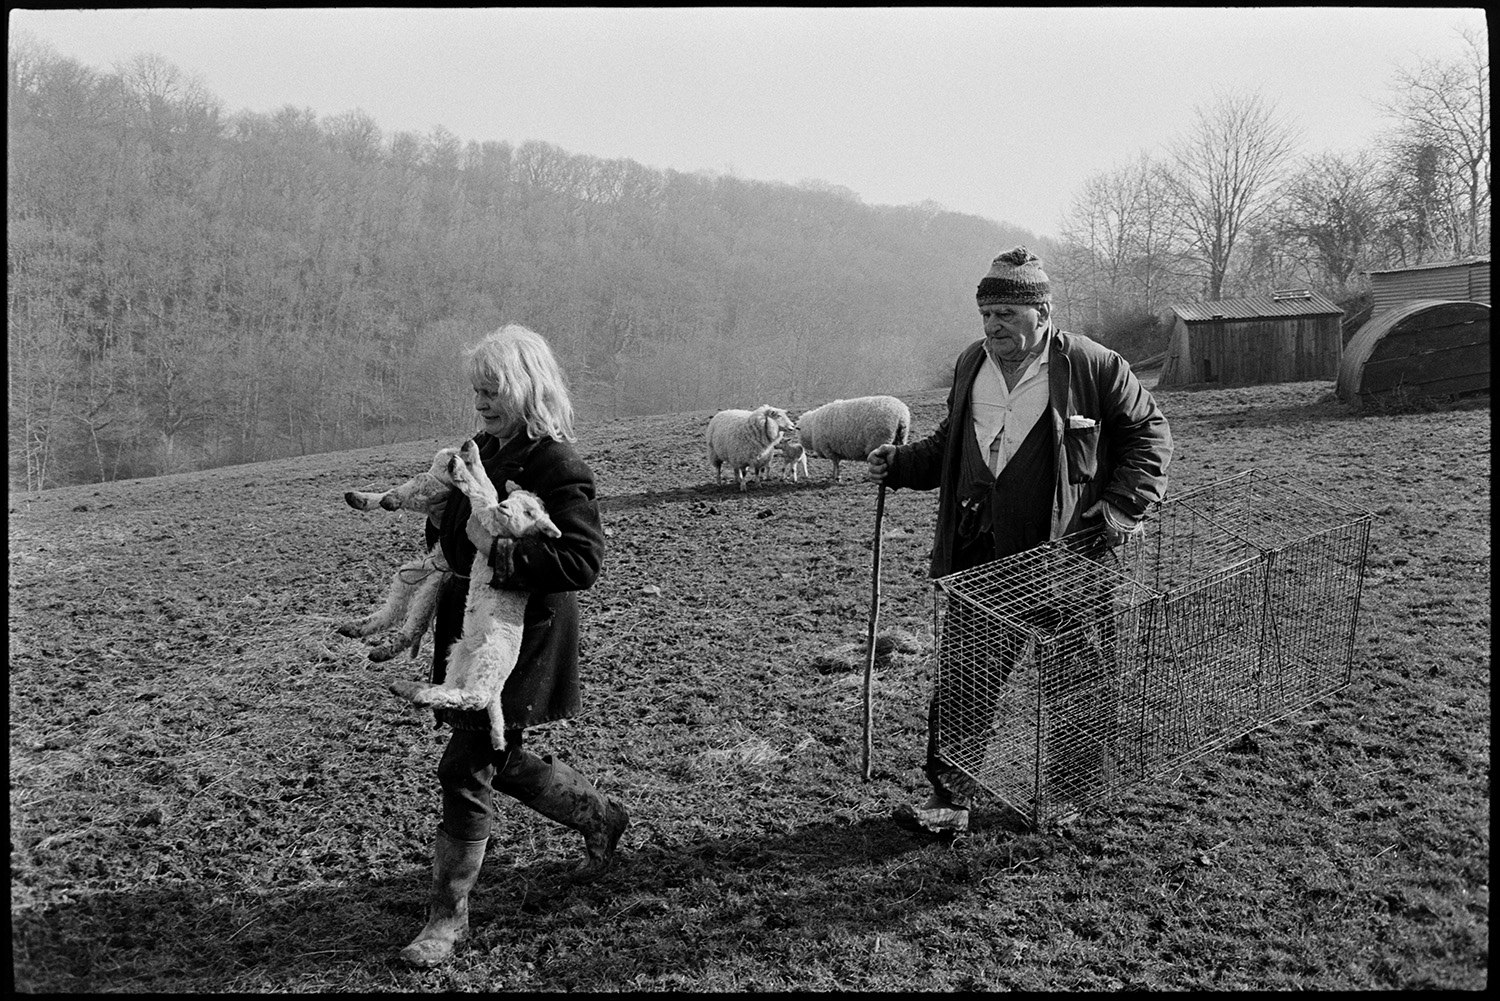 Farmers trying to make lamb take to ewe in shed. 
[Jo Curzon and Archie Parkhouse walking across a field at Millhams. Jo Curzon is carrying to lambs while Archie Parkhouse is holding a wire cage. Sheds and ewes with their lambs can be seen in the background.]